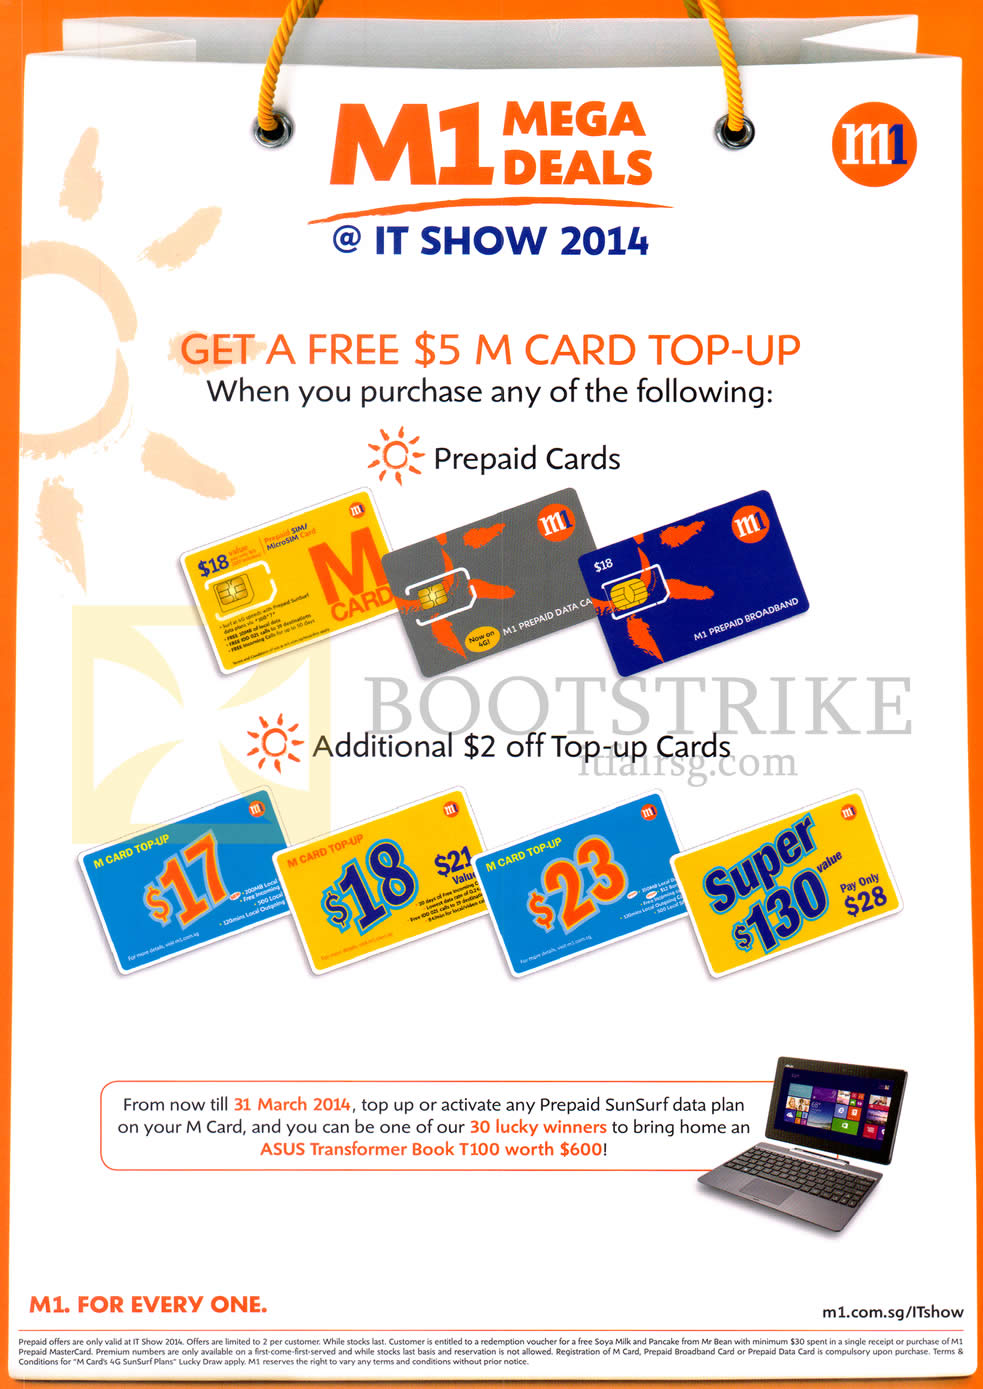 IT SHOW 2014 price list image brochure of M1 Prepaid Free 5 Dollar M Card Top Up, Additional 2 Dollar Off Top-up Cards